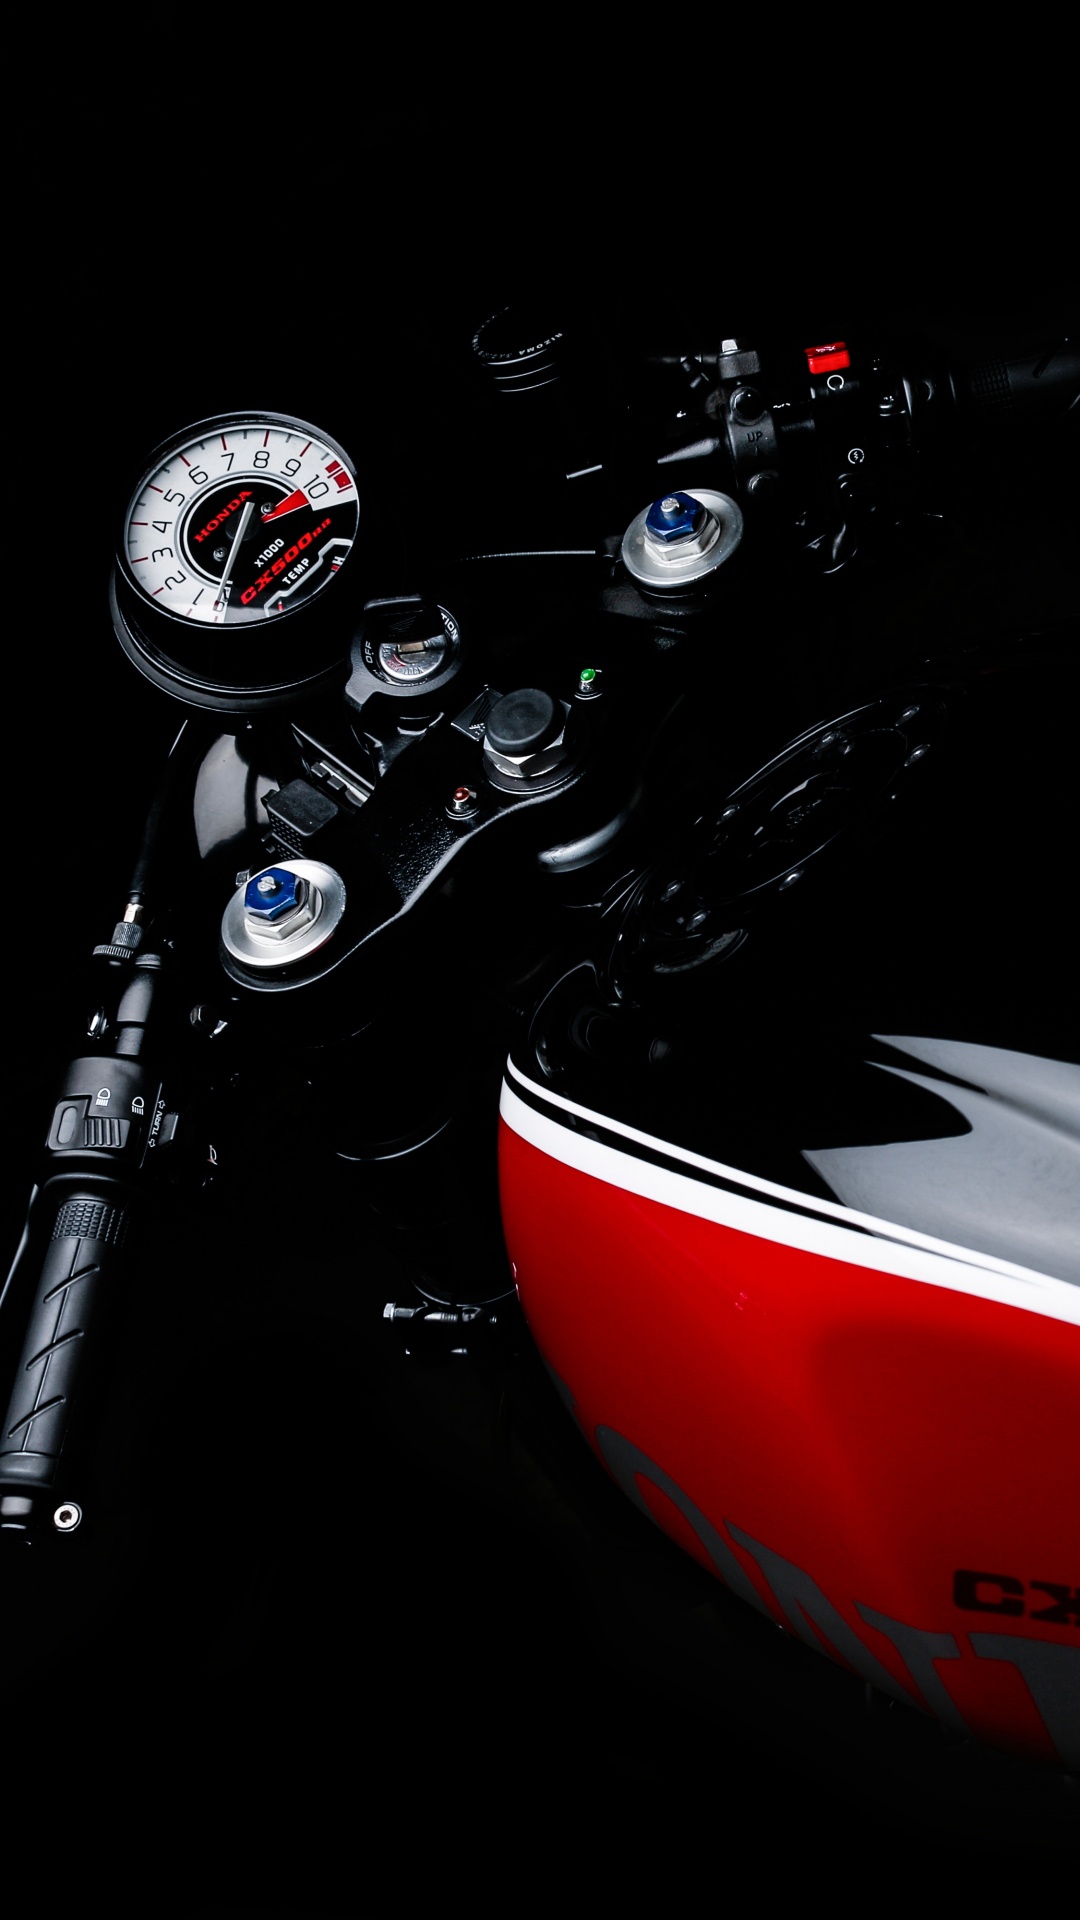 Red and Black Honda Motorcycle. Wallpaper in 1080x1920 Resolution